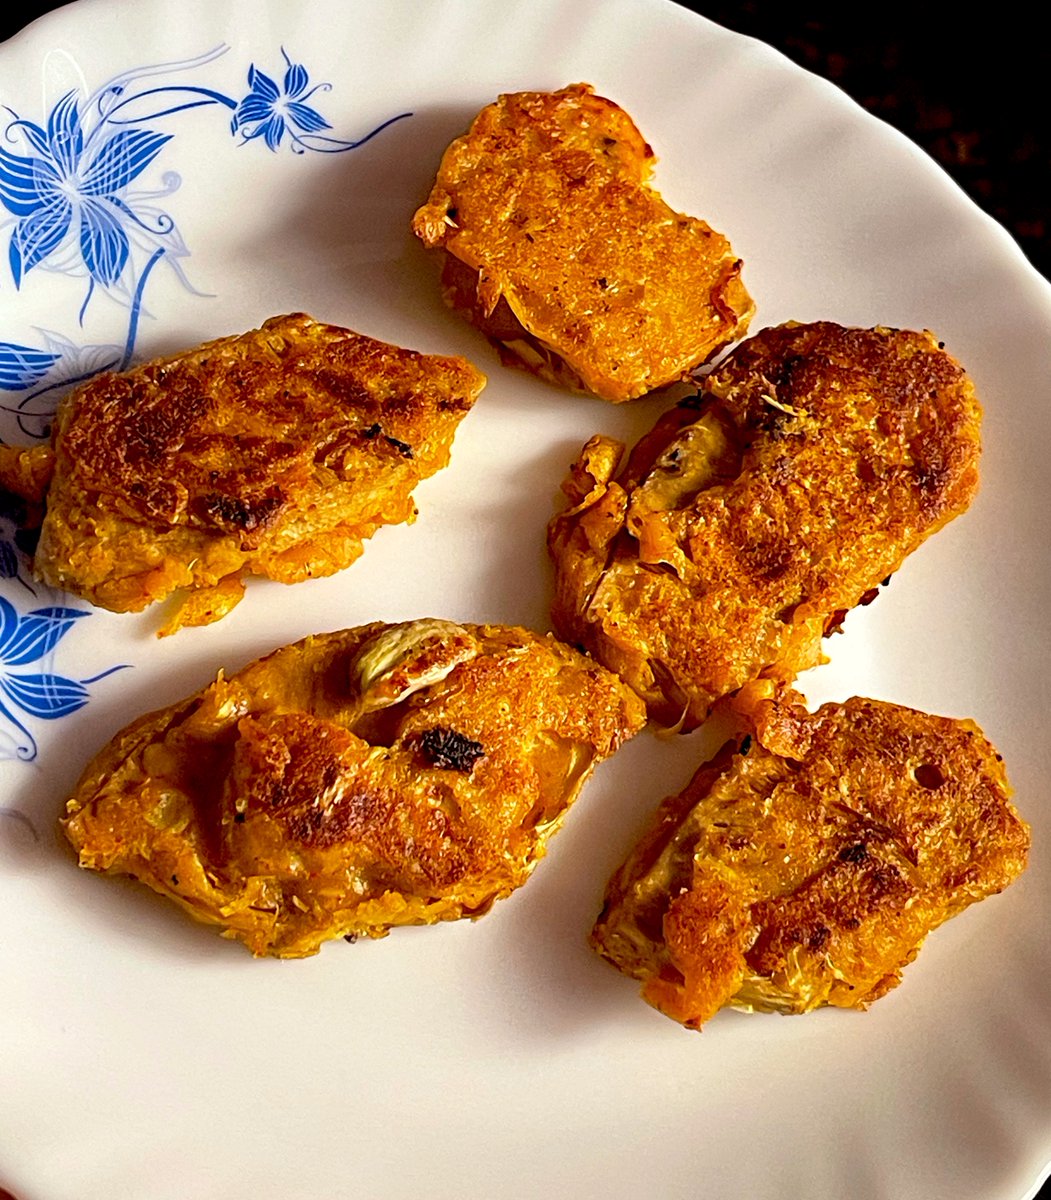 Raw Jackfruit Fritters / ପଣସ କଠା ପିଠଉ 

On a side note, Odisha is the #1 jackfruit producing state in India. (Source - APEDA)